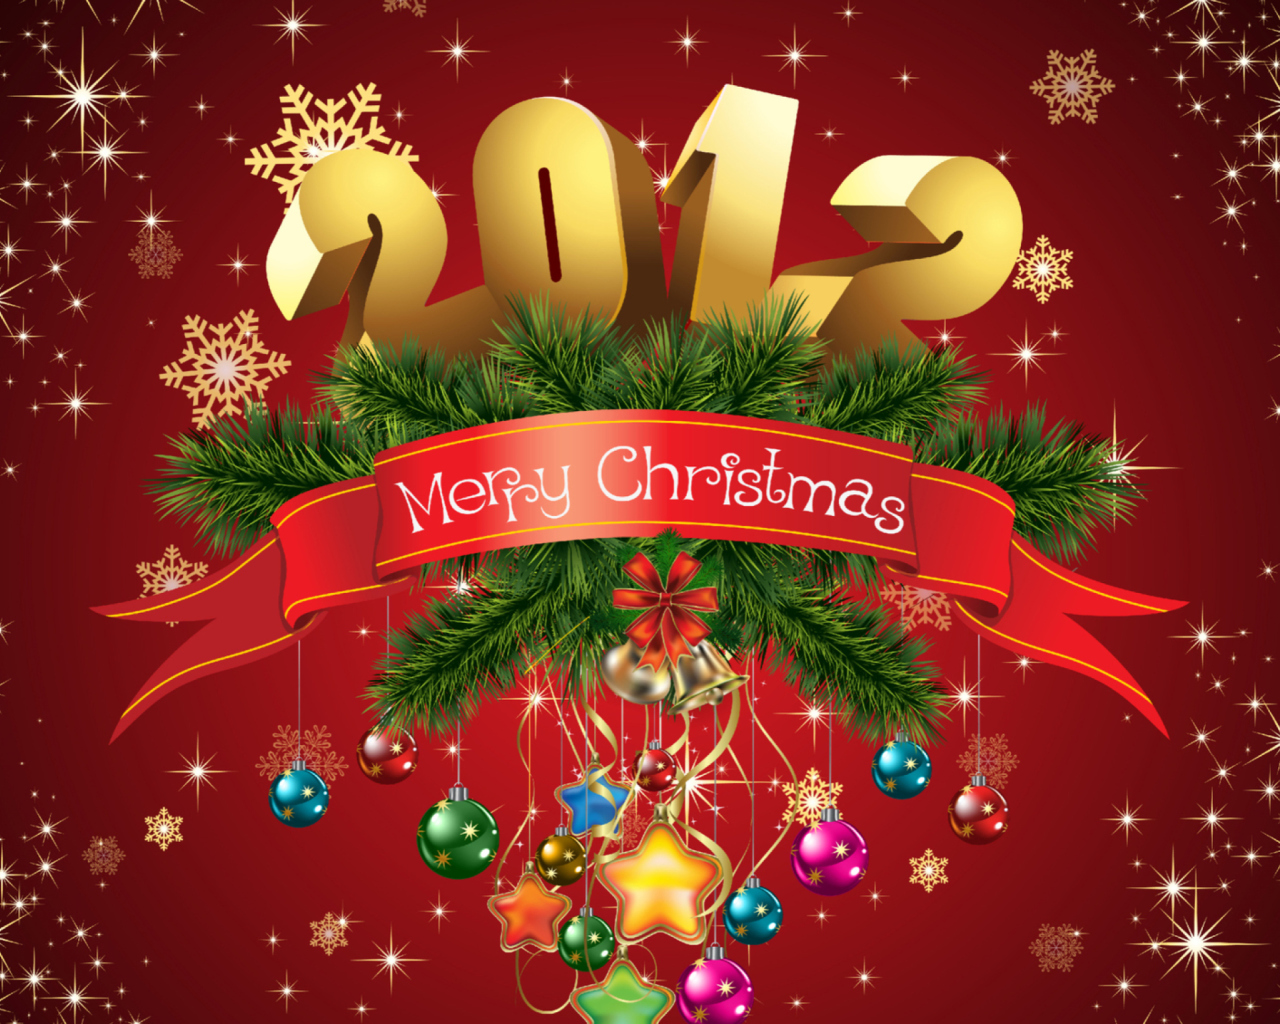 New Year And Merry Christmas wallpaper 1280x1024